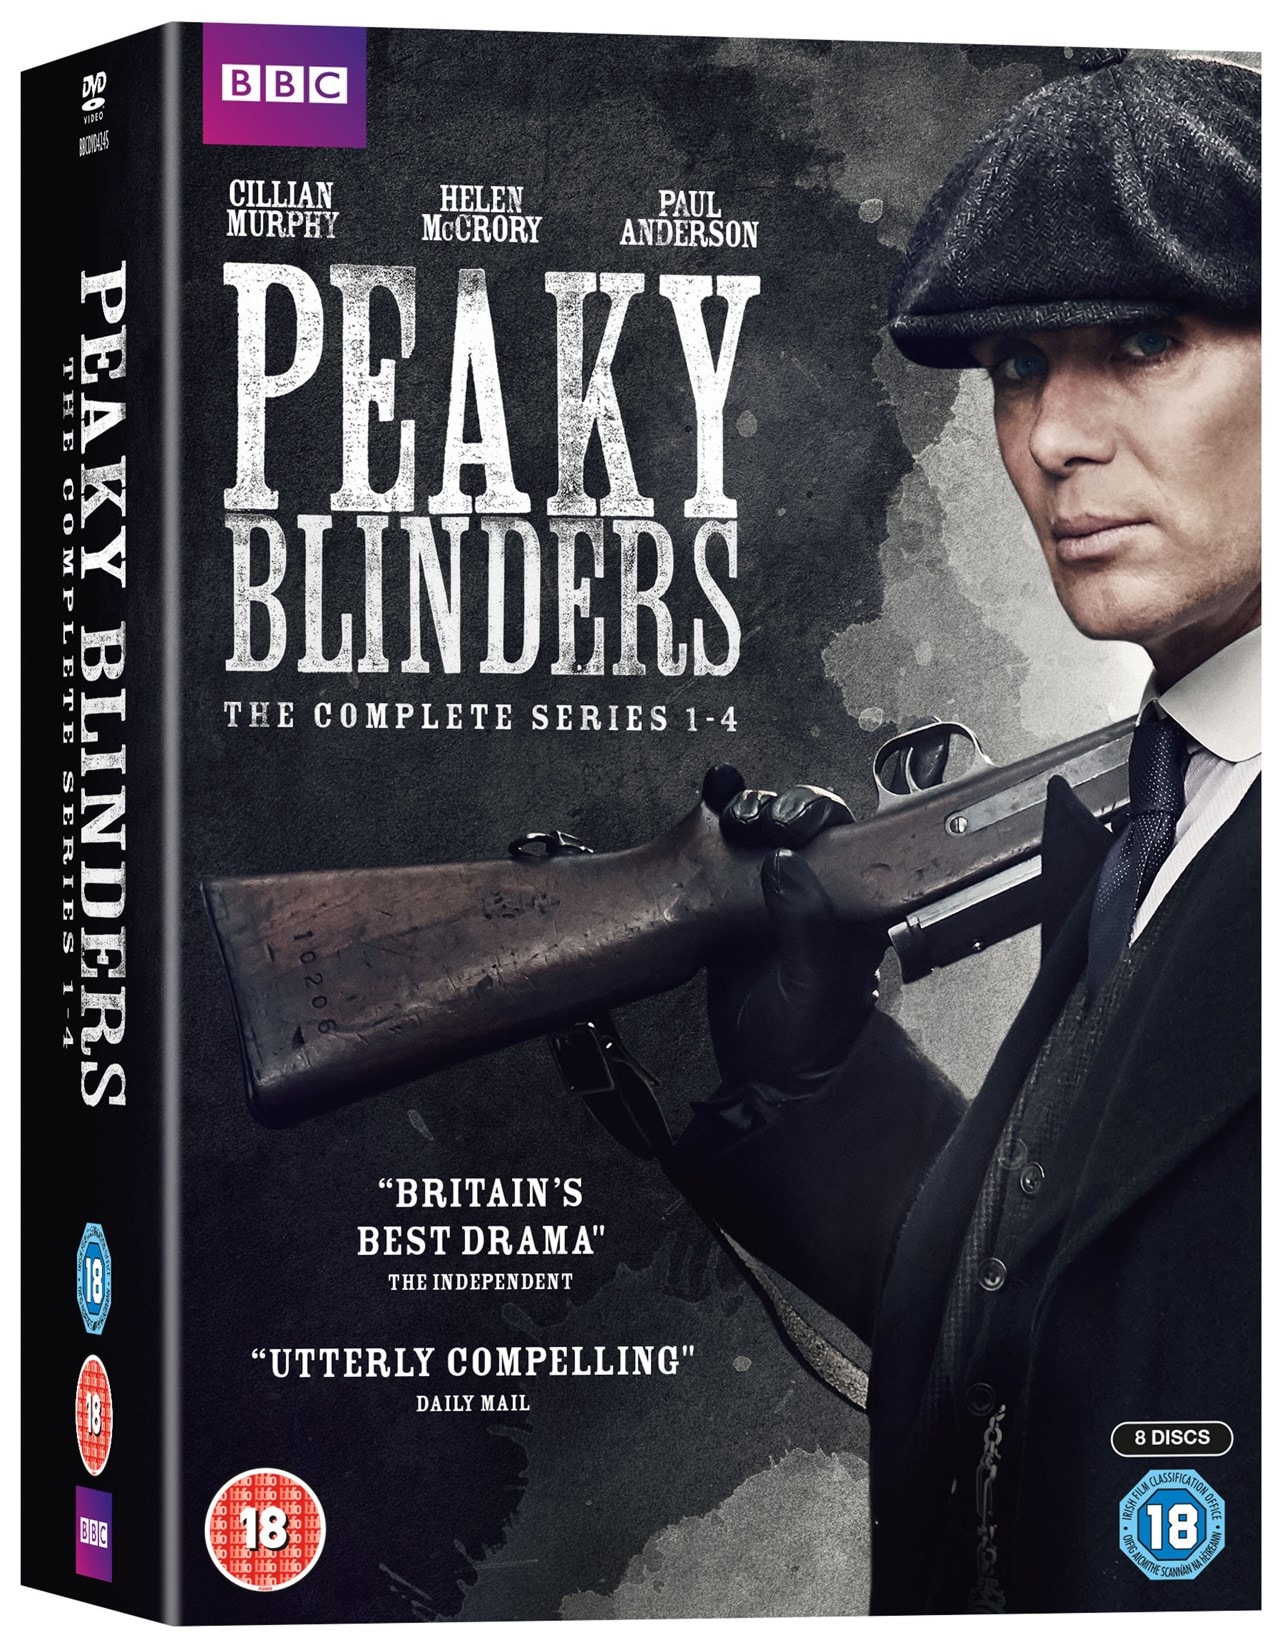 Peaky Blinders The Complete Series 1 4 Dvd Box Set Free Shipping Over £20 Hmv Store 